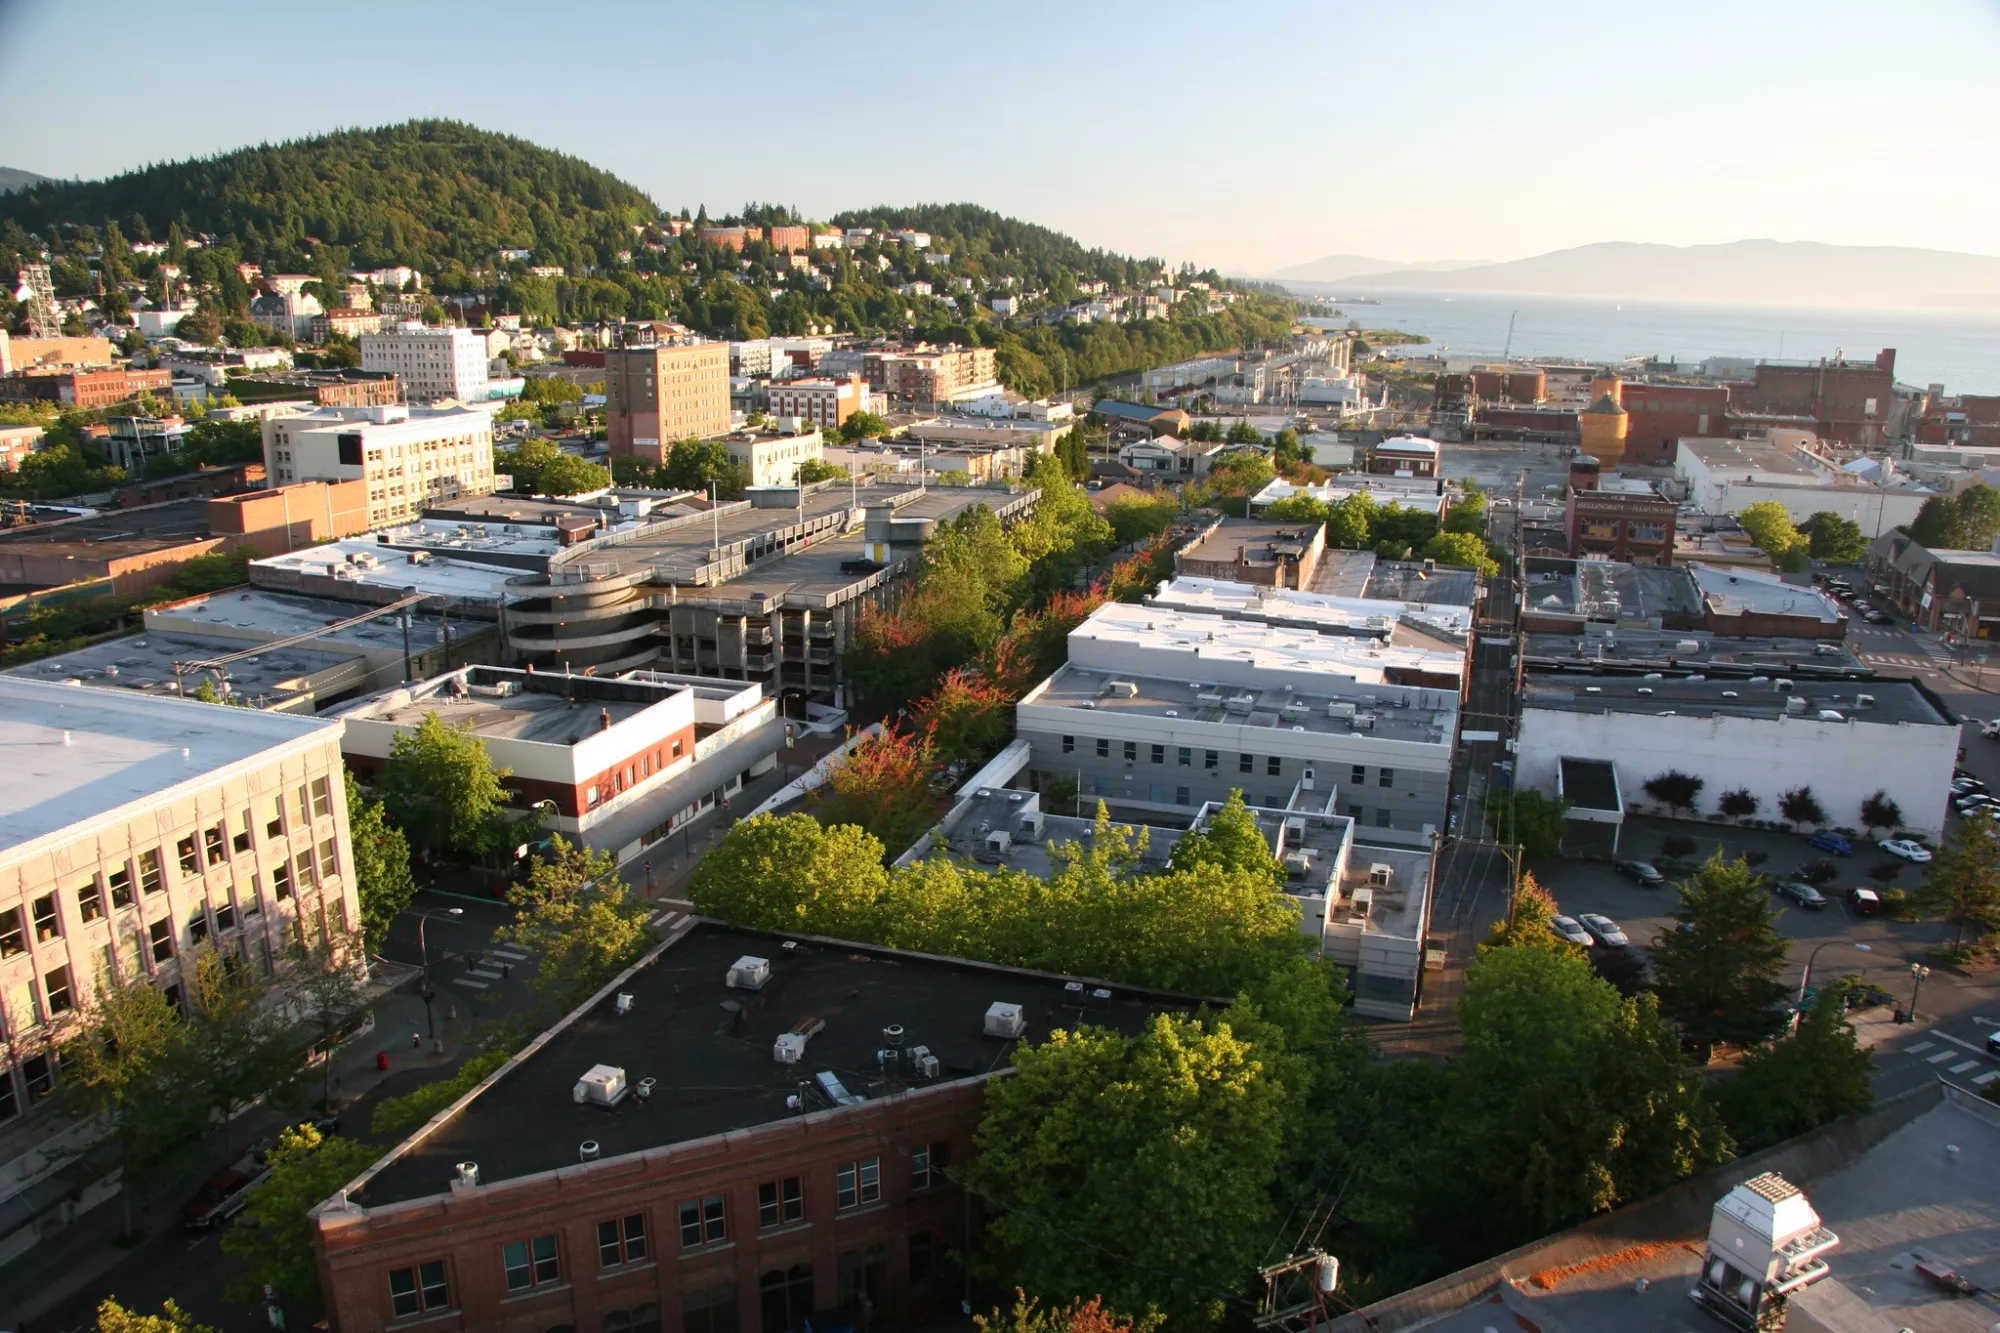 Downtown Bellingham buildings from above